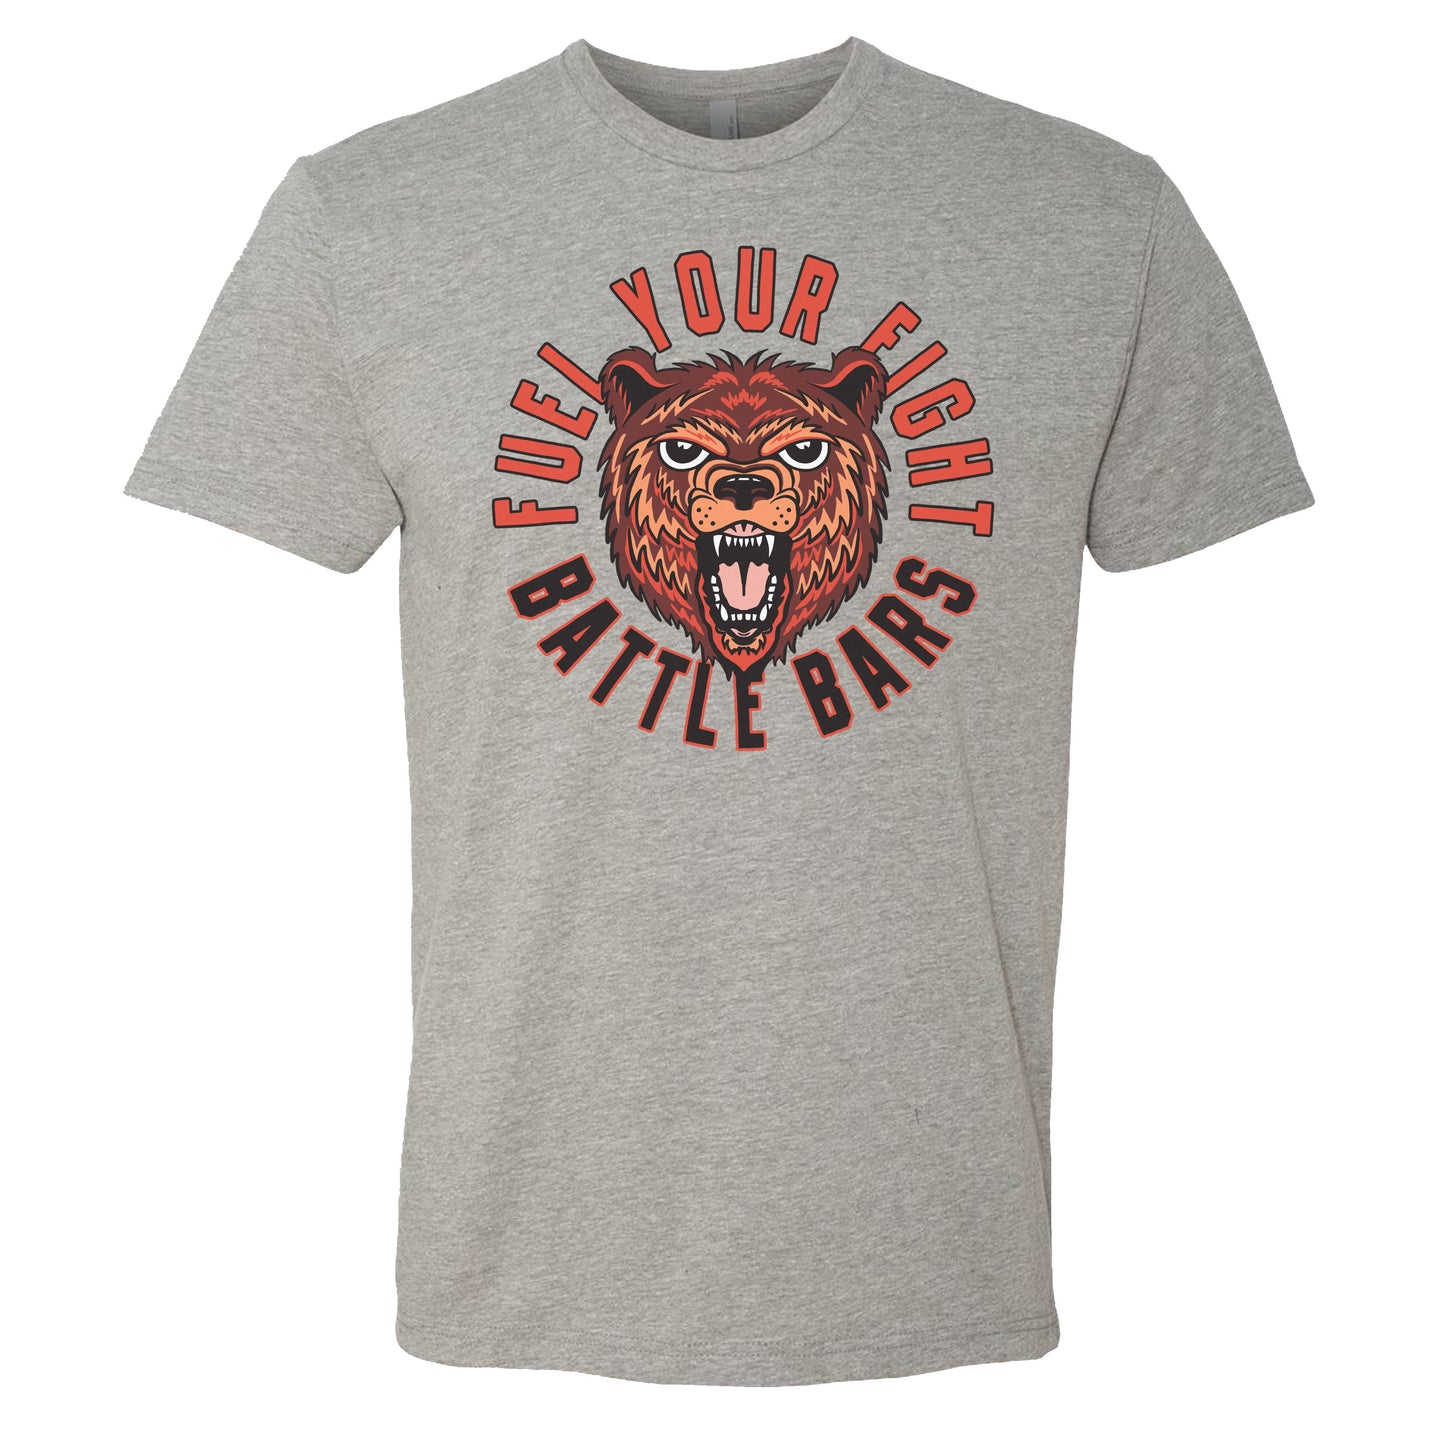 Fuel Your Fight Bear Tee